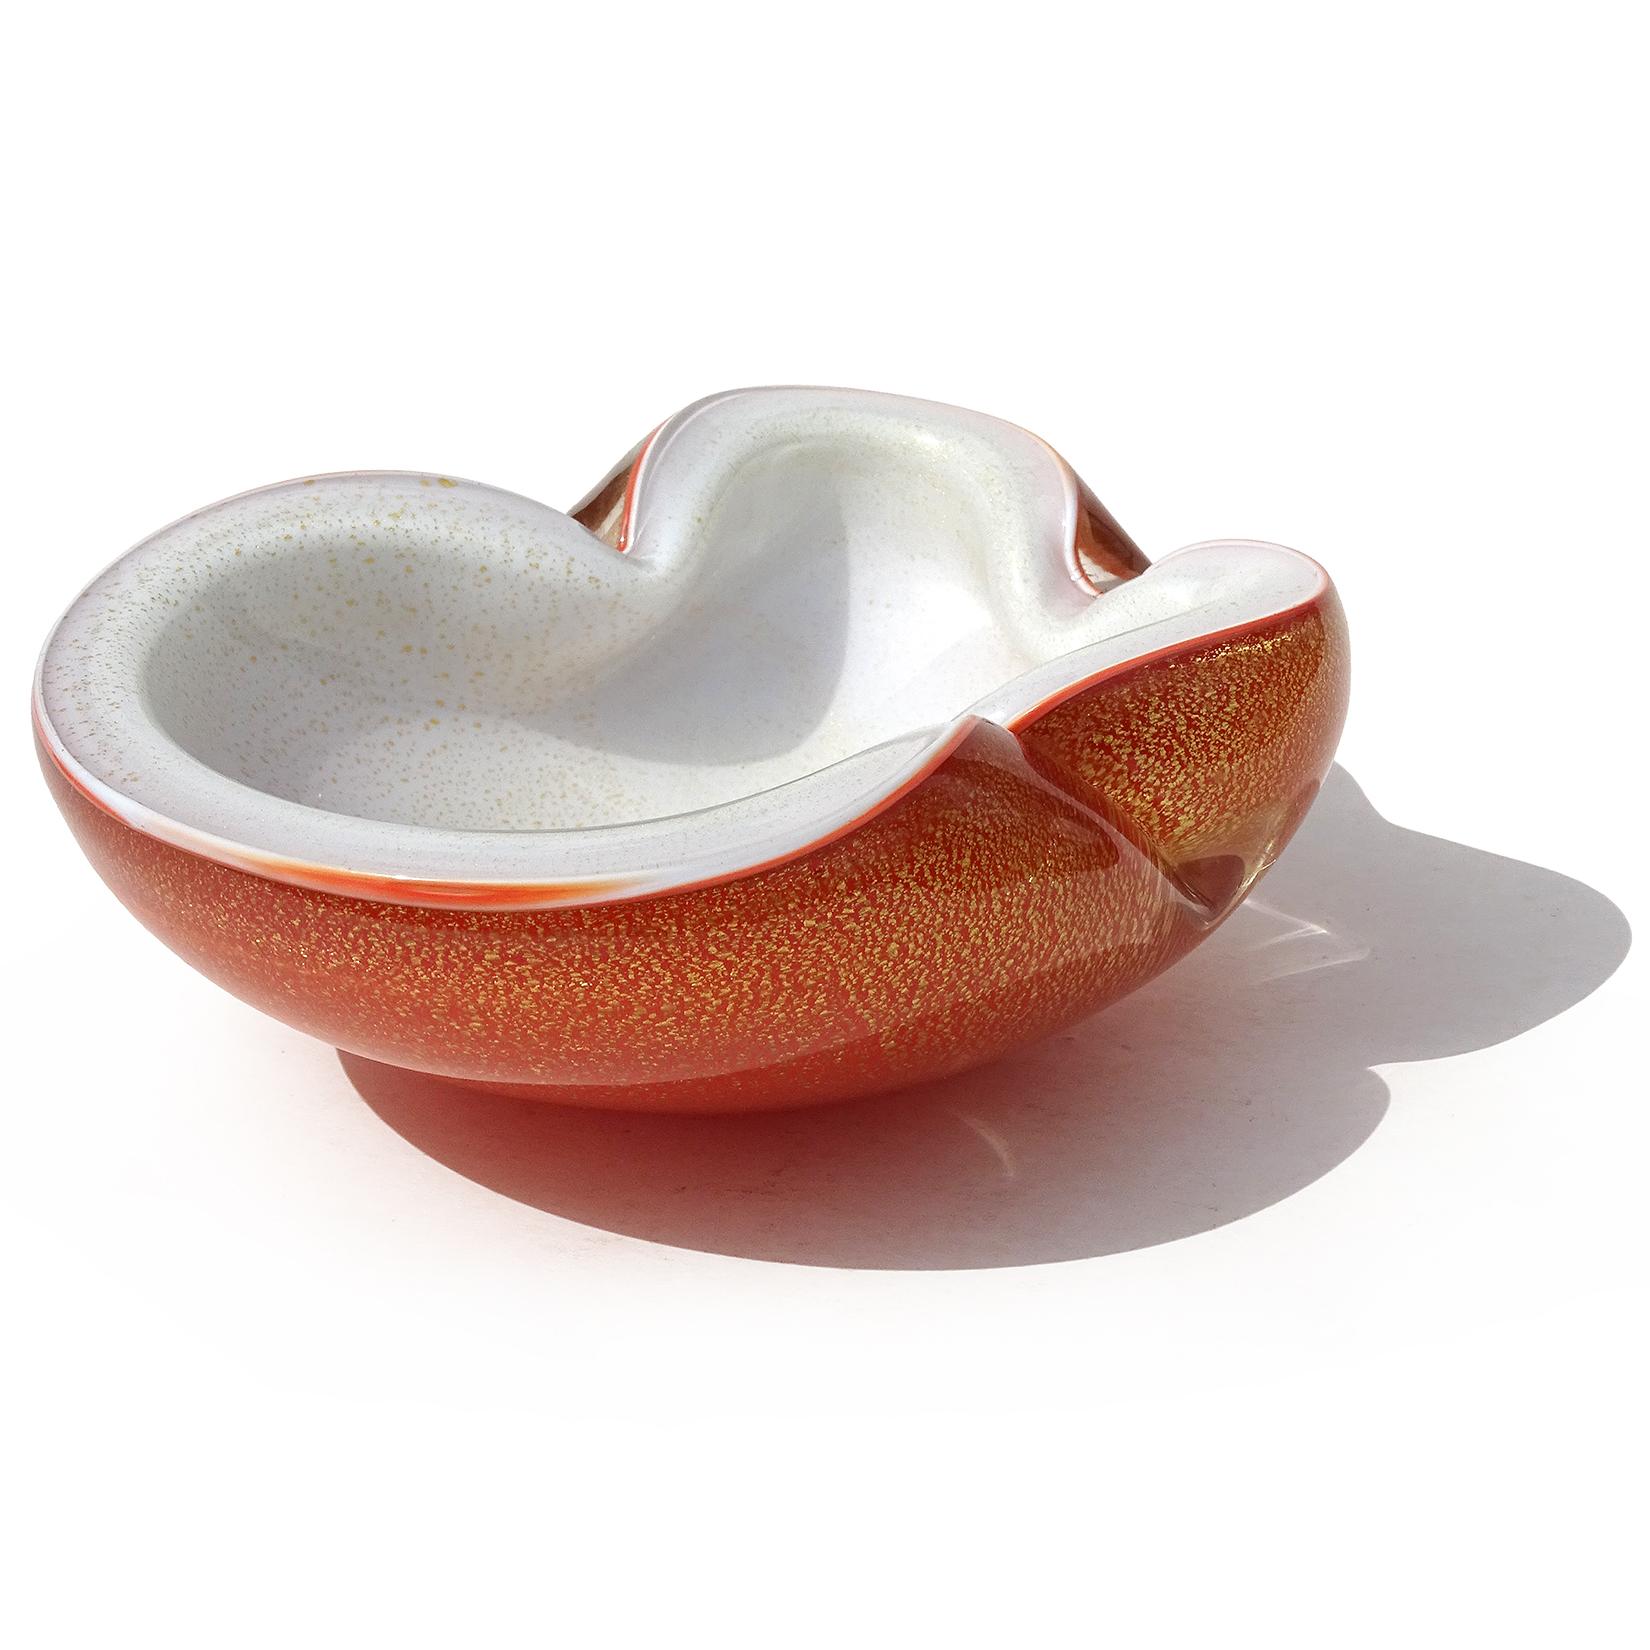 Beautiful vintage Murano hand blown orange over white, and gold flecks Italian art glass decorative bowl / ashtray. Documented to Master glass artist and designer Alfredo Barbini, circa 1950-1960. Published design. The color is a rich 